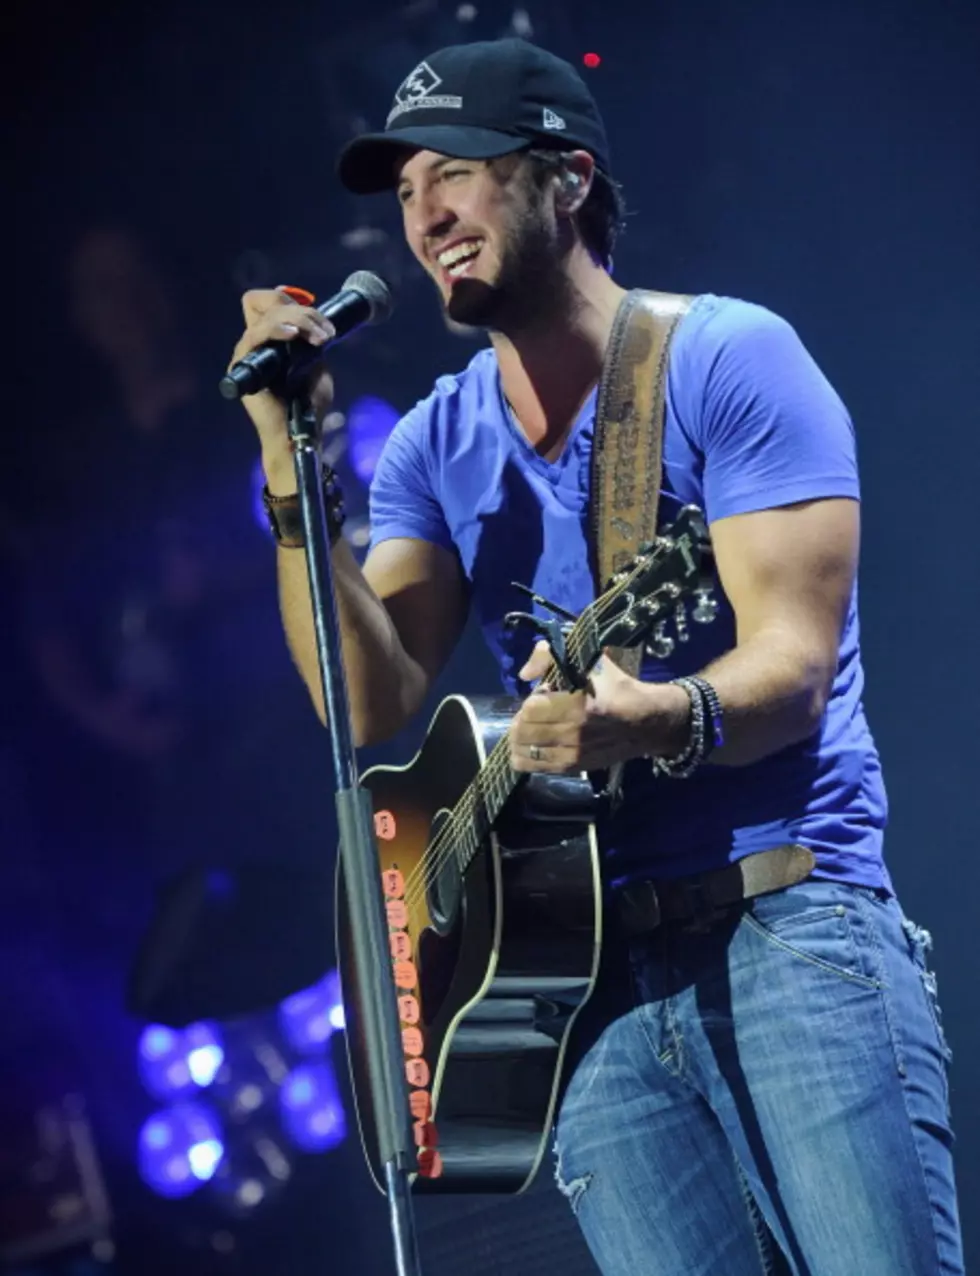 Luke Bryan Challenges The Henningsens on Today’s Daily Duel